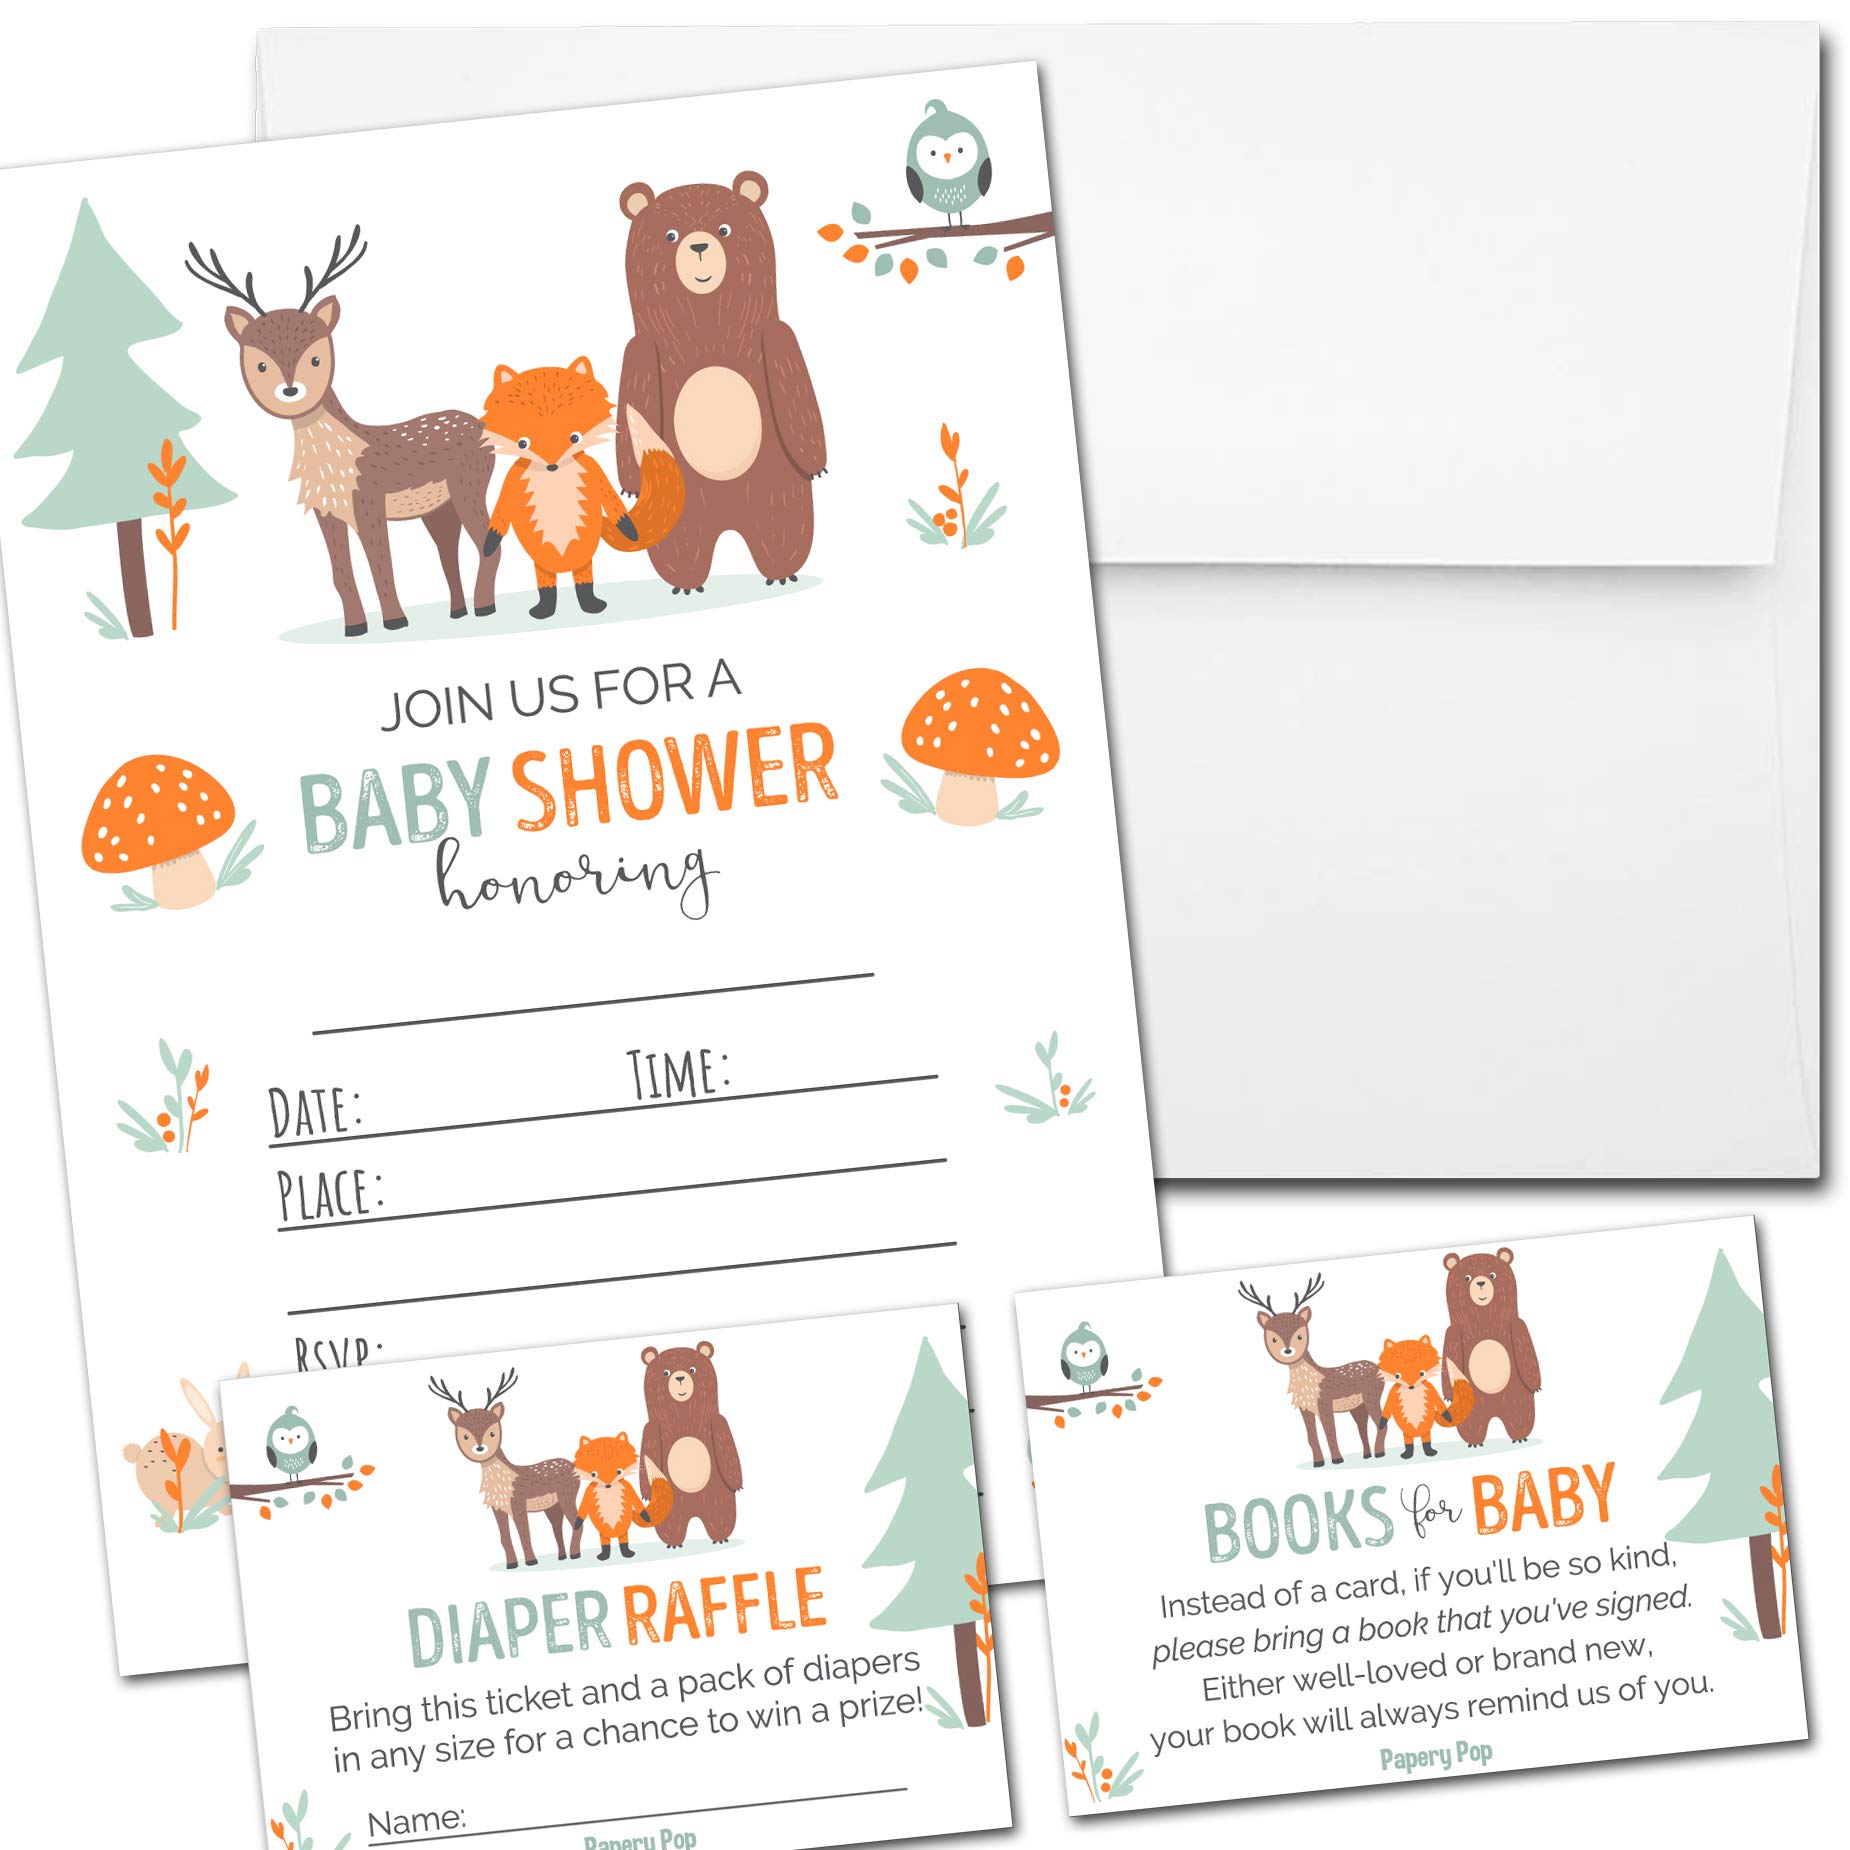 Set of 25 Baby Shower Invitations for Boy or Girl with Envelopes, Diaper Raffle Tickets and Baby Shower Book Request Cards - Gender Neutral Woodland Animals